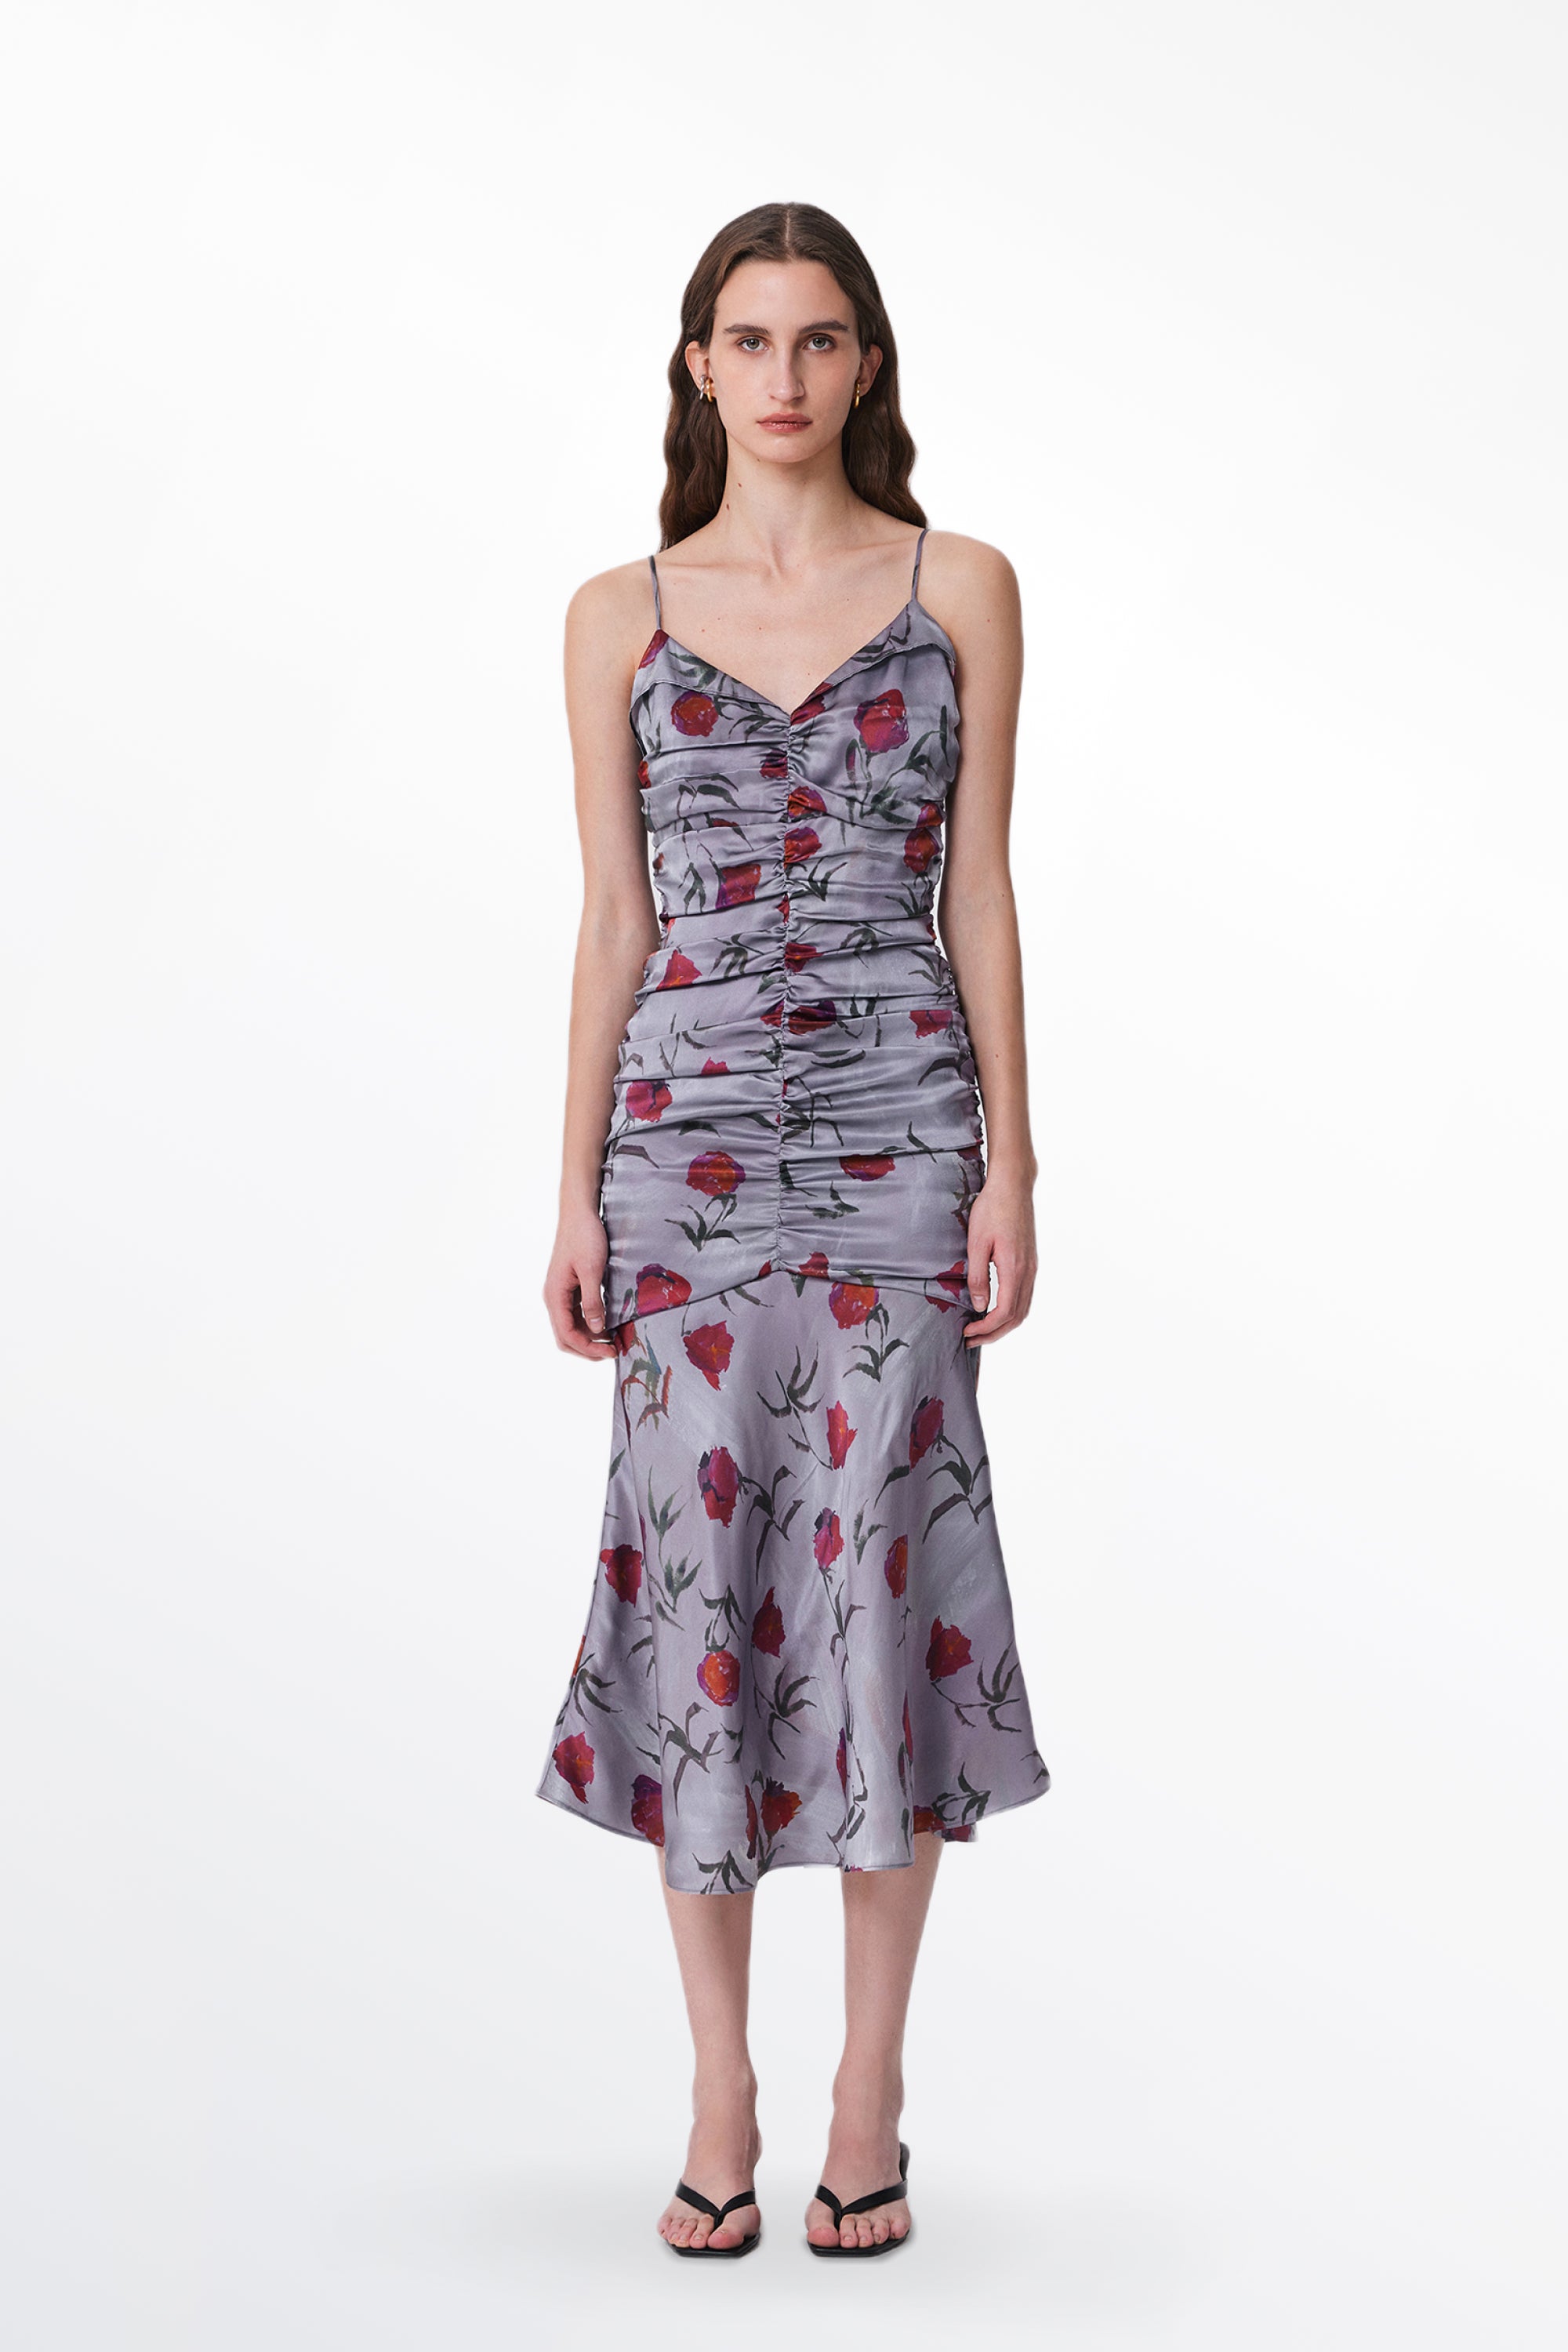 Lee Hand-Painted Rose Dress